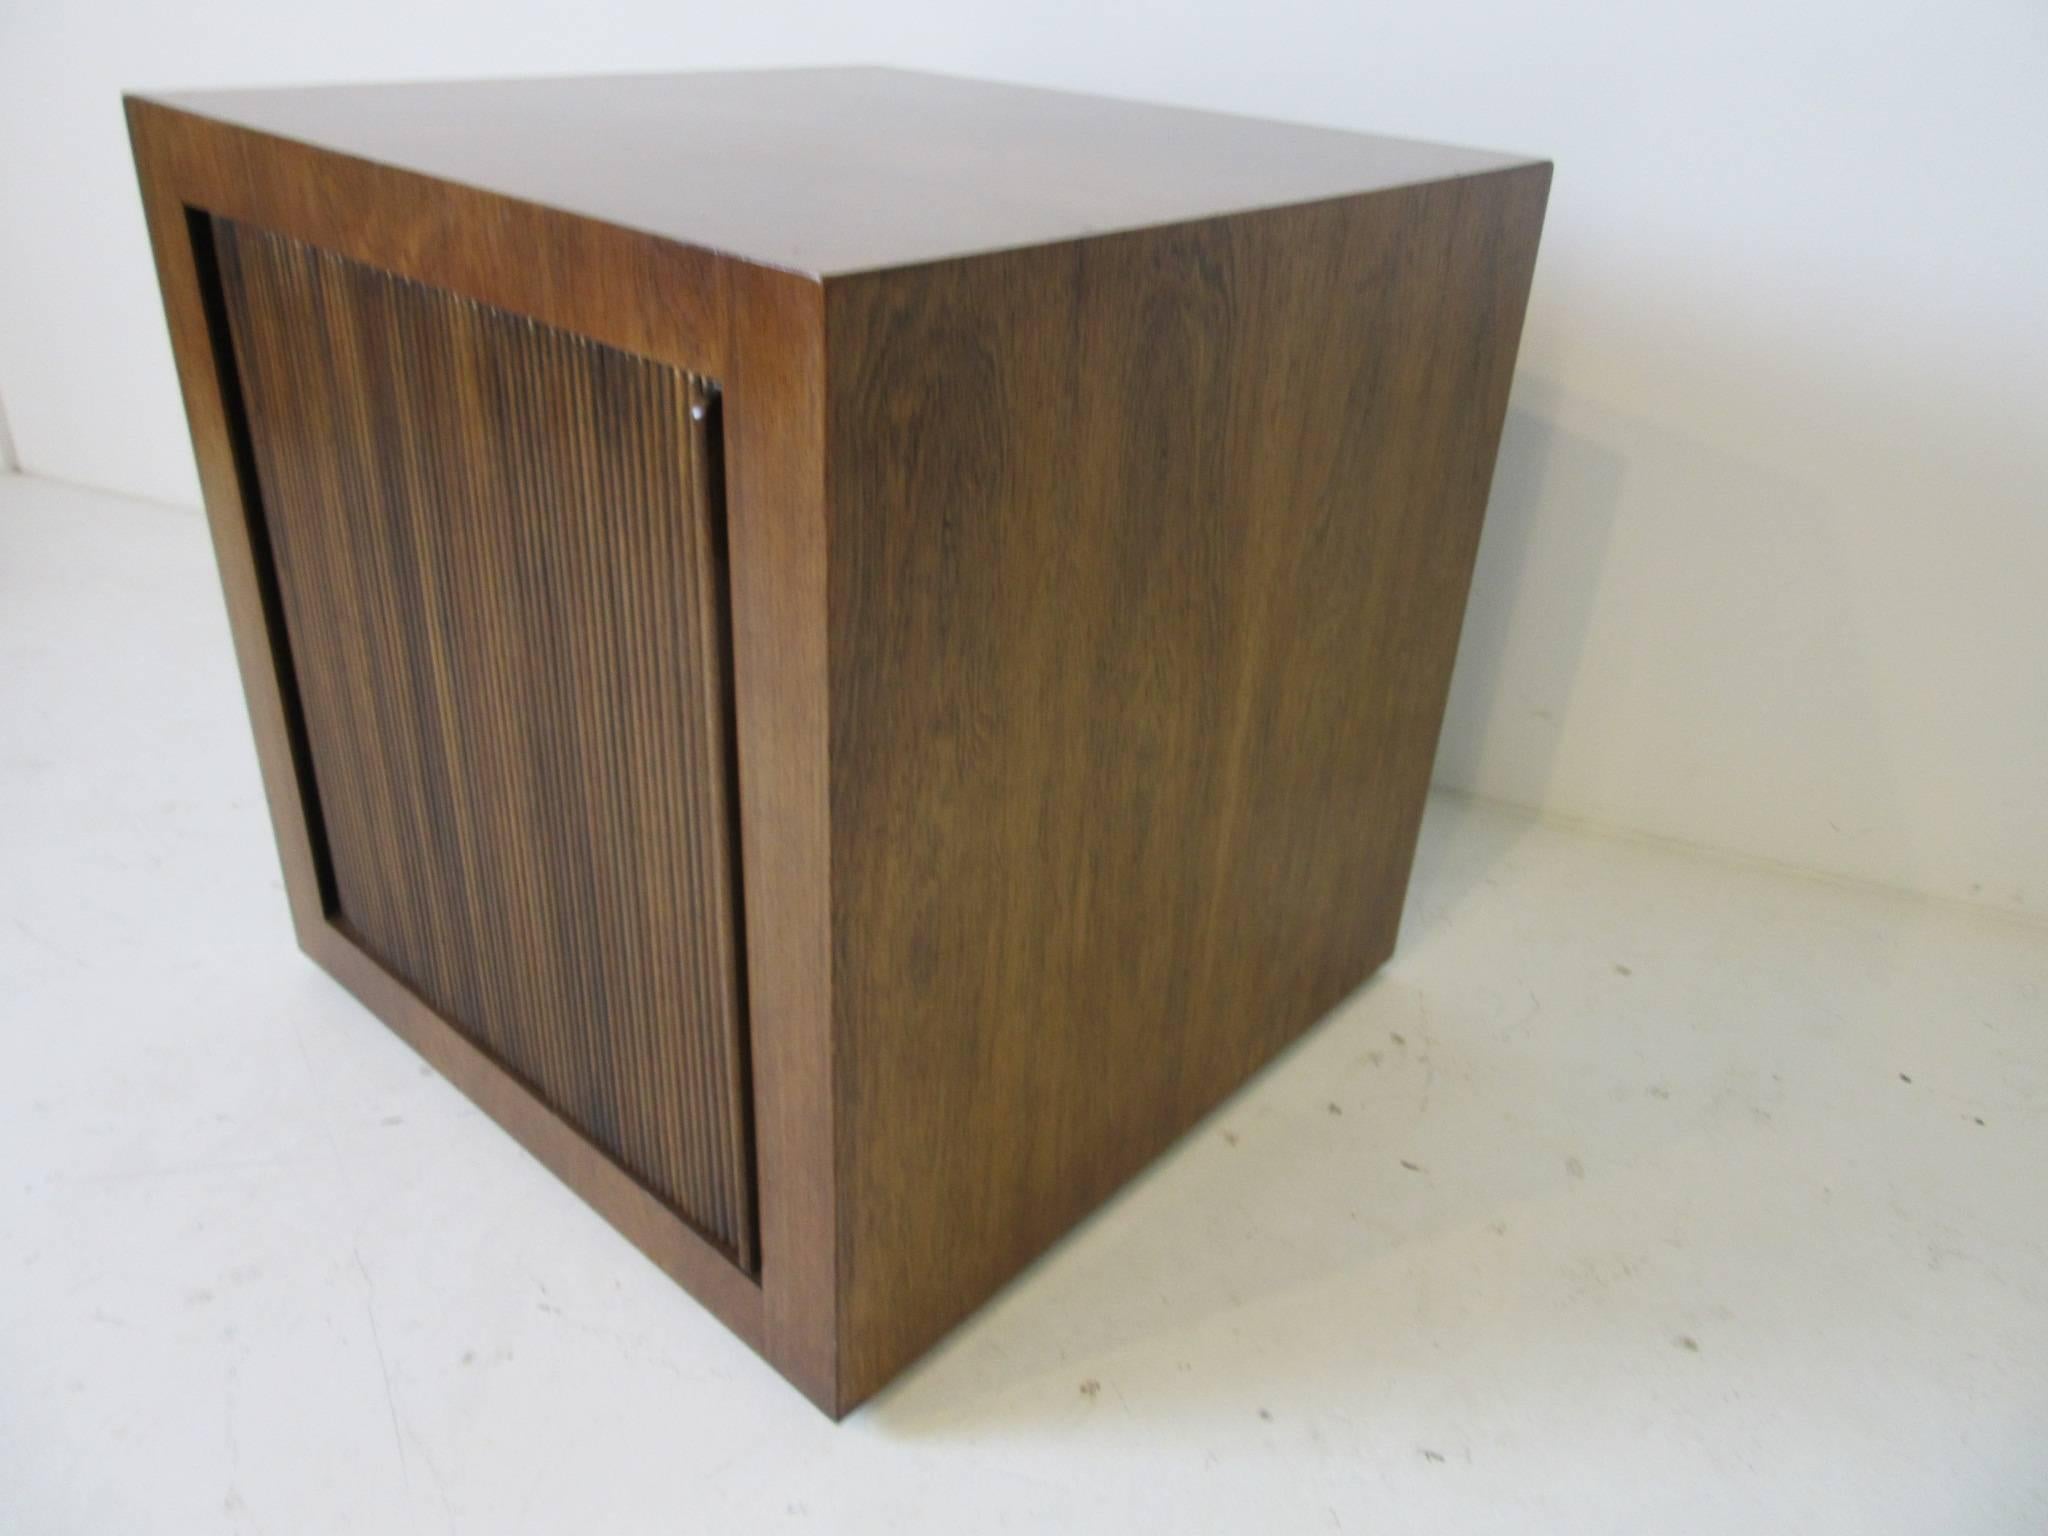 A rolling bar cube in a rich Brazilian rosewood with a tambour door reveling storage and a bottle shelve with cut away area for larger bottles. This is a great item for that library, study or smaller space, retains the manufactures hang tag by the